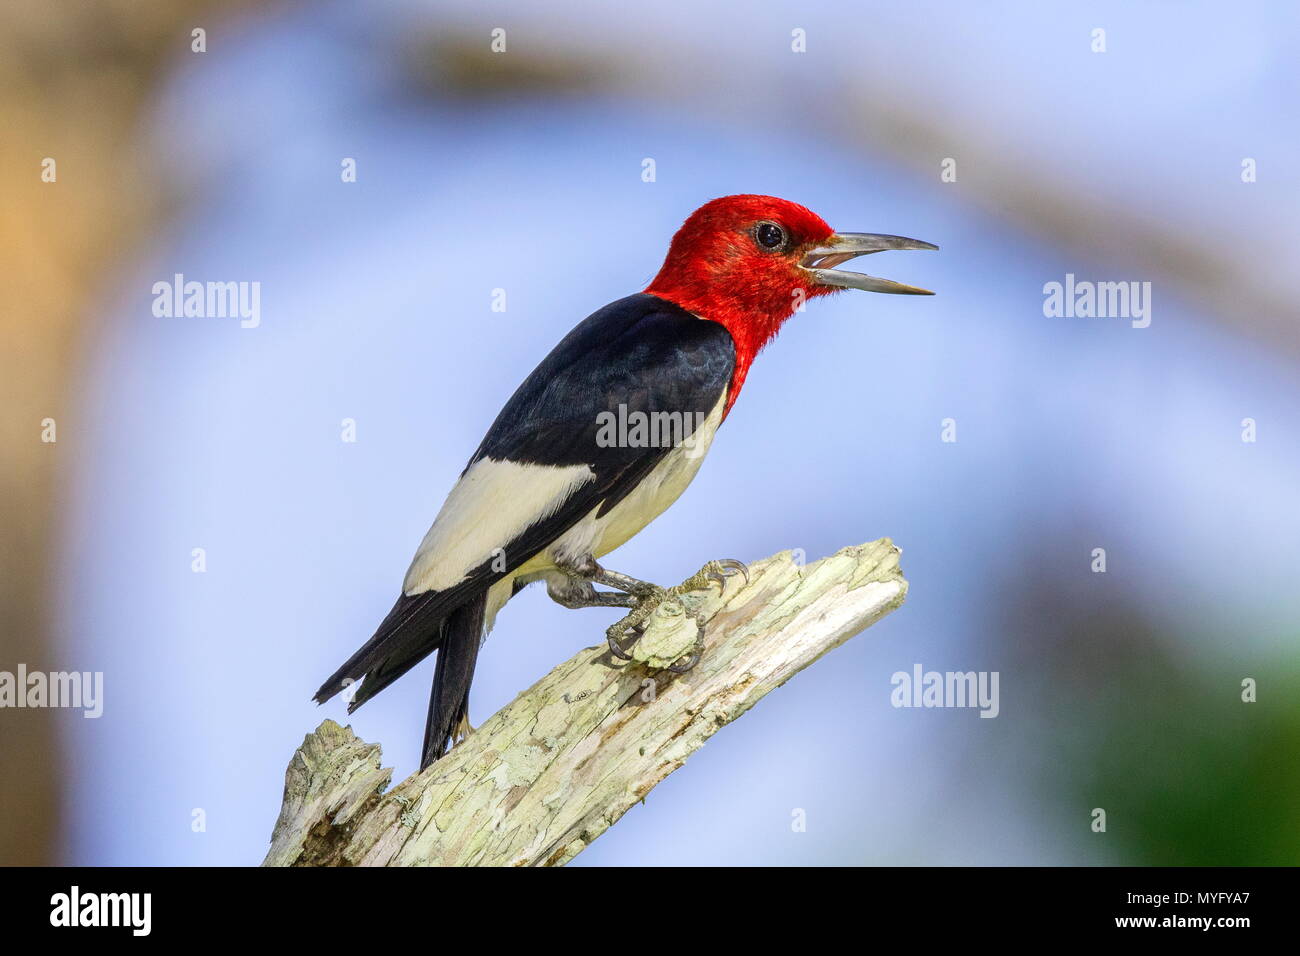 A red-headed woodpecker, Melanerpes erythrocephalus, perched on a dead pine tree branch. Stock Photo